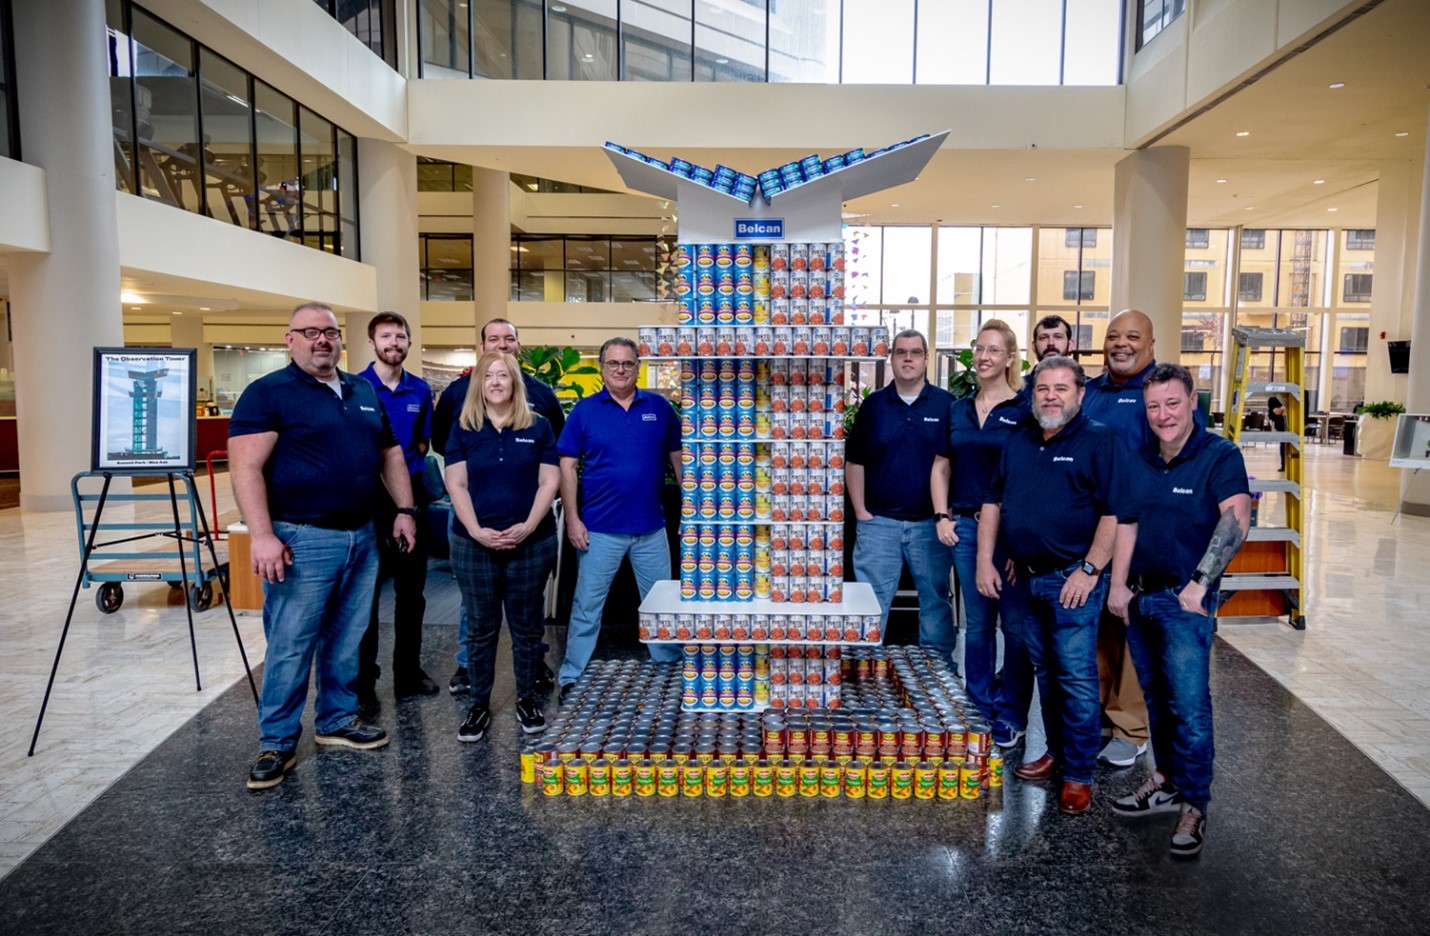 Belcan Canstruction Summit Observation Tower